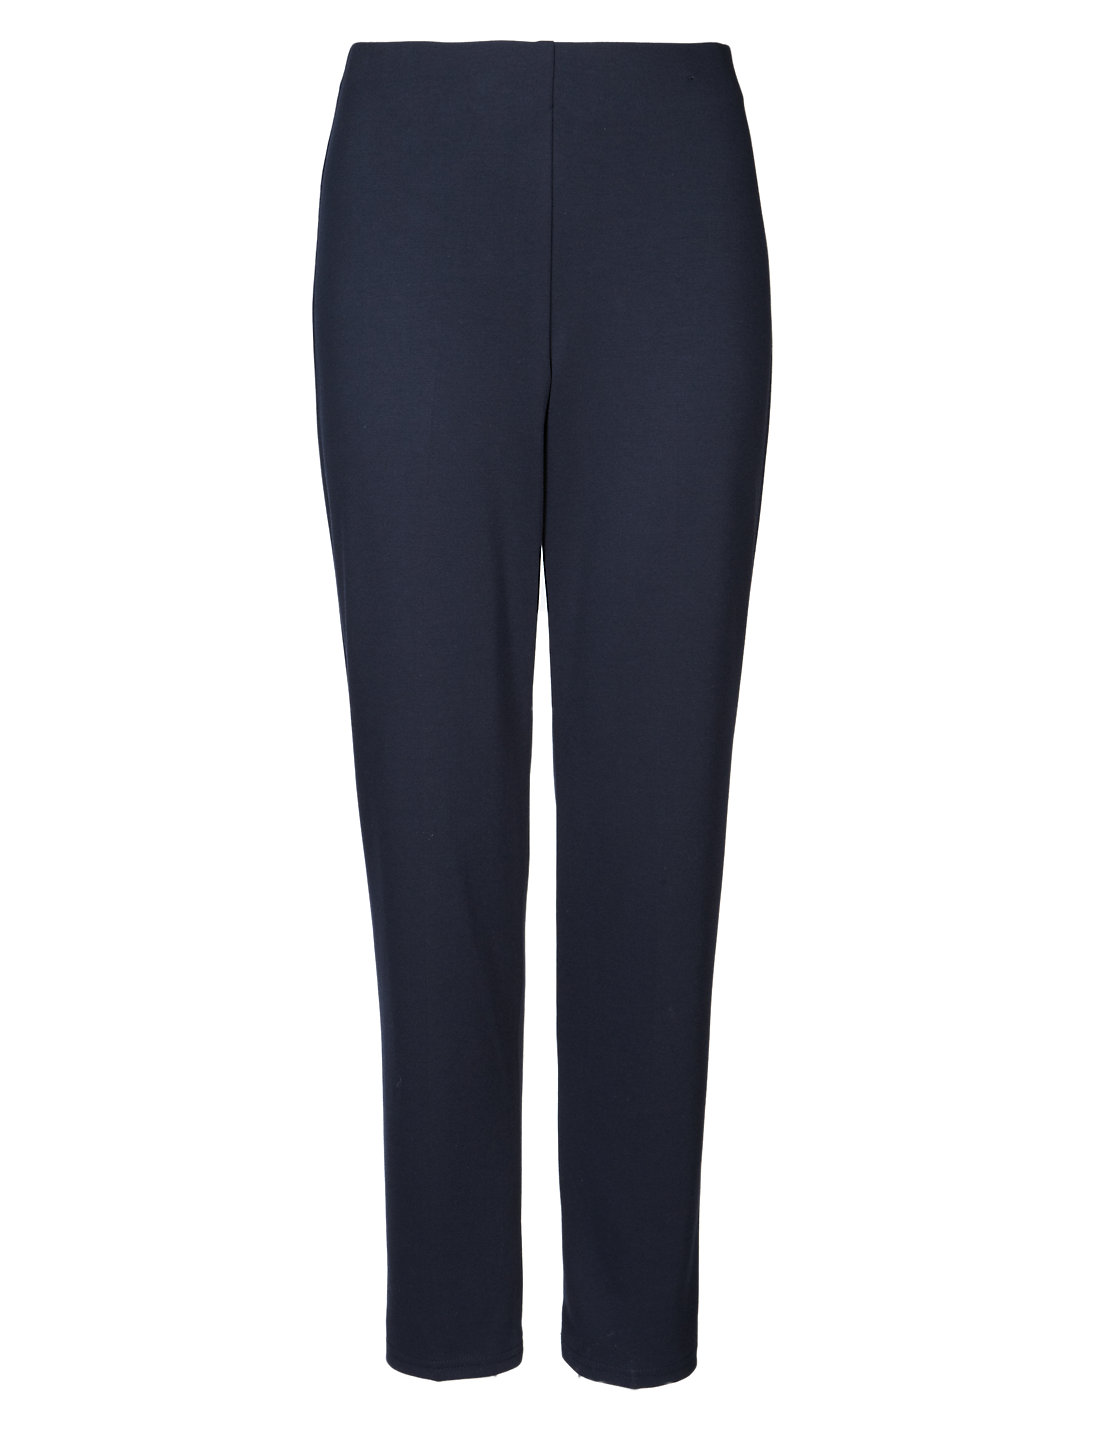 Marks and Spencer - - M&5 ASSORTED Ladies Trousers - Size 10 to 22